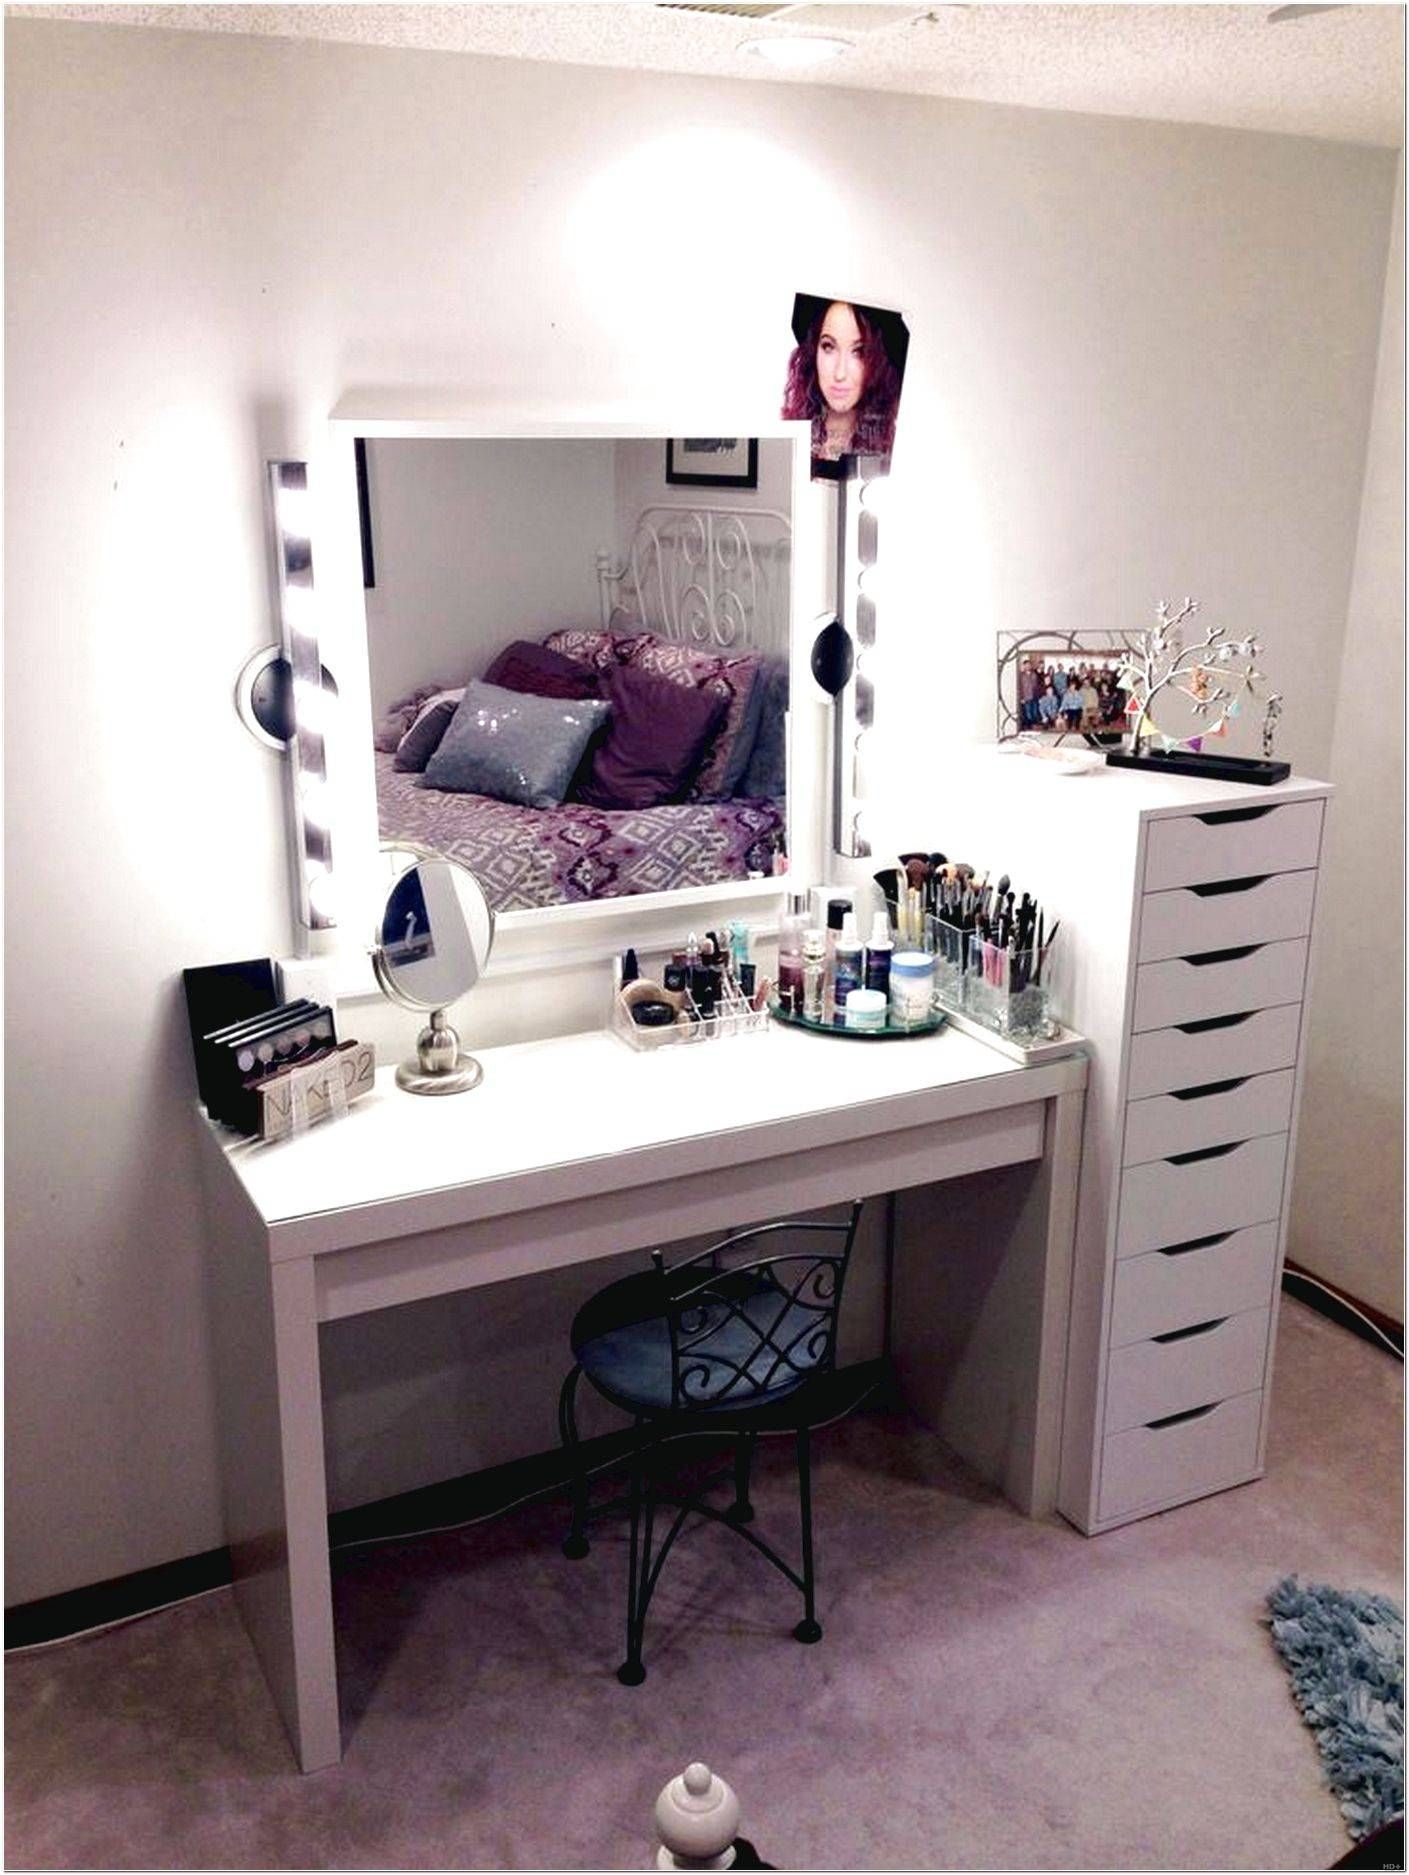 Mirror On Stand For Dressing Table Design Ideas – Interior Design With Regard To Mirrors On Stand For Dressing Table (View 3 of 15)